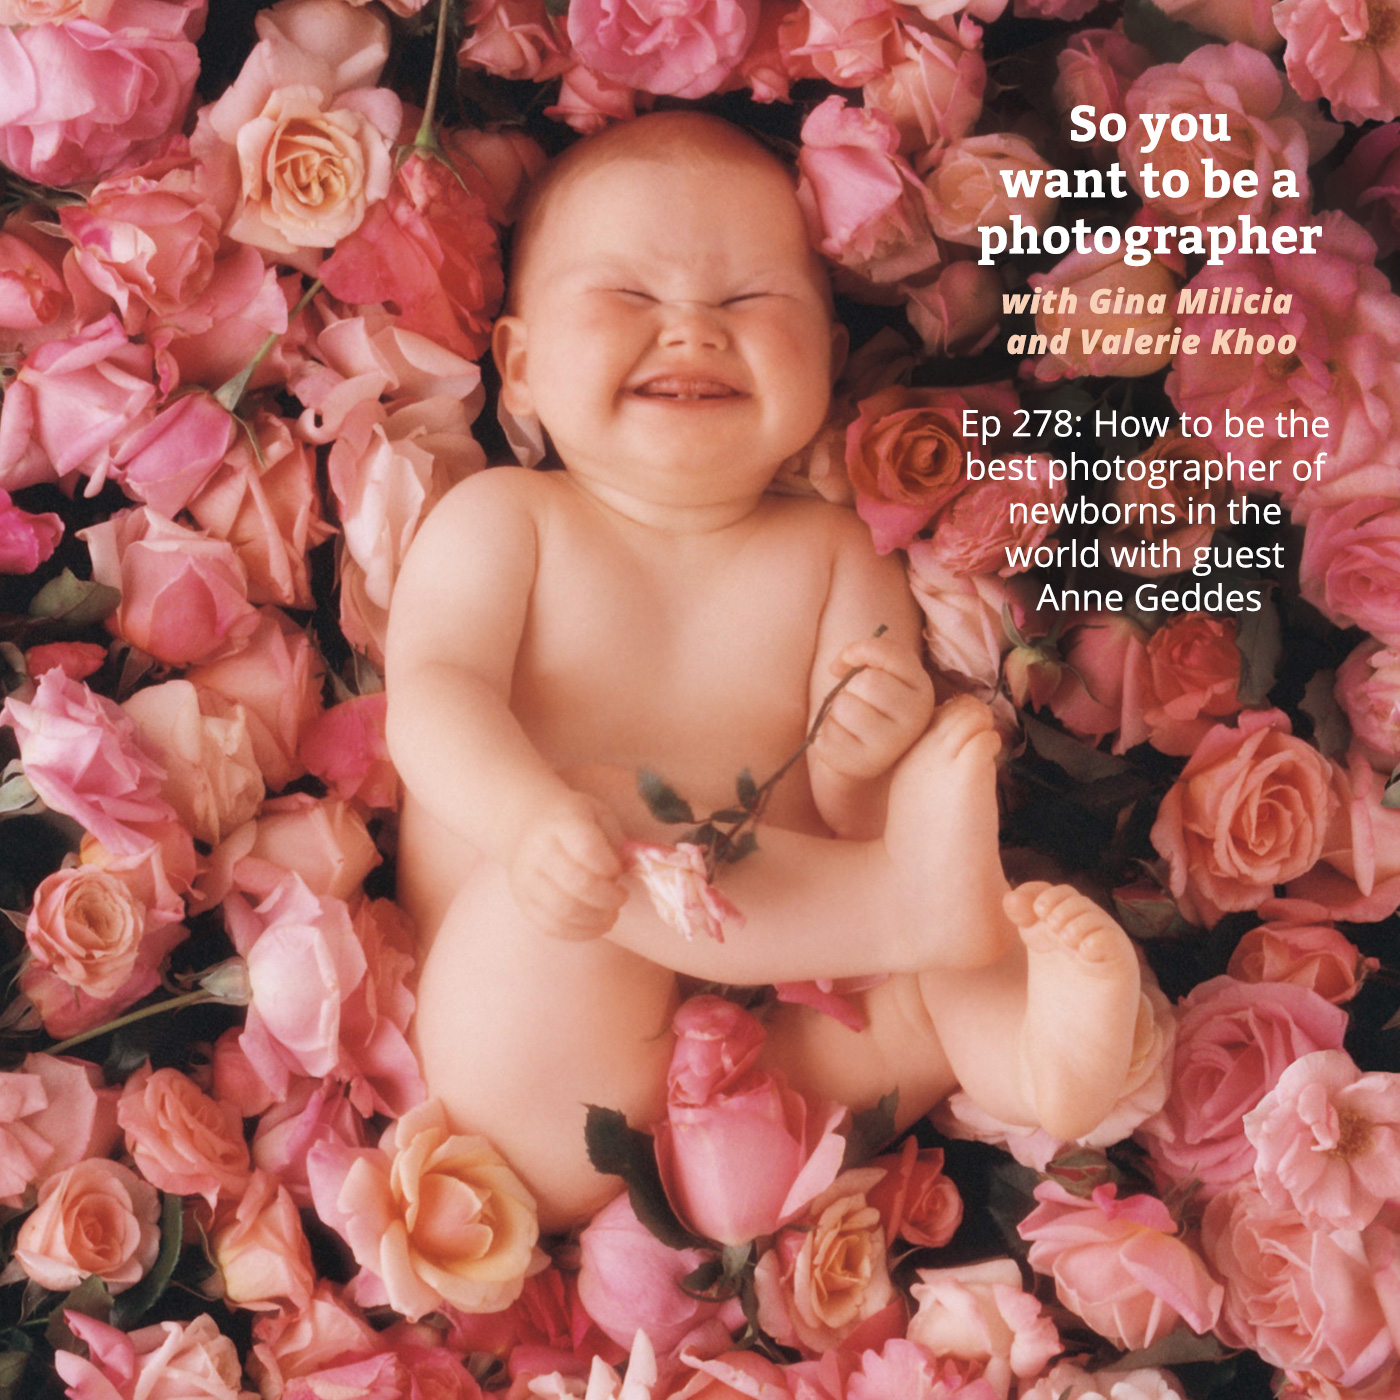 PHOTO 278: How to be the best photographer of newborns in the world with guest Anne Geddes